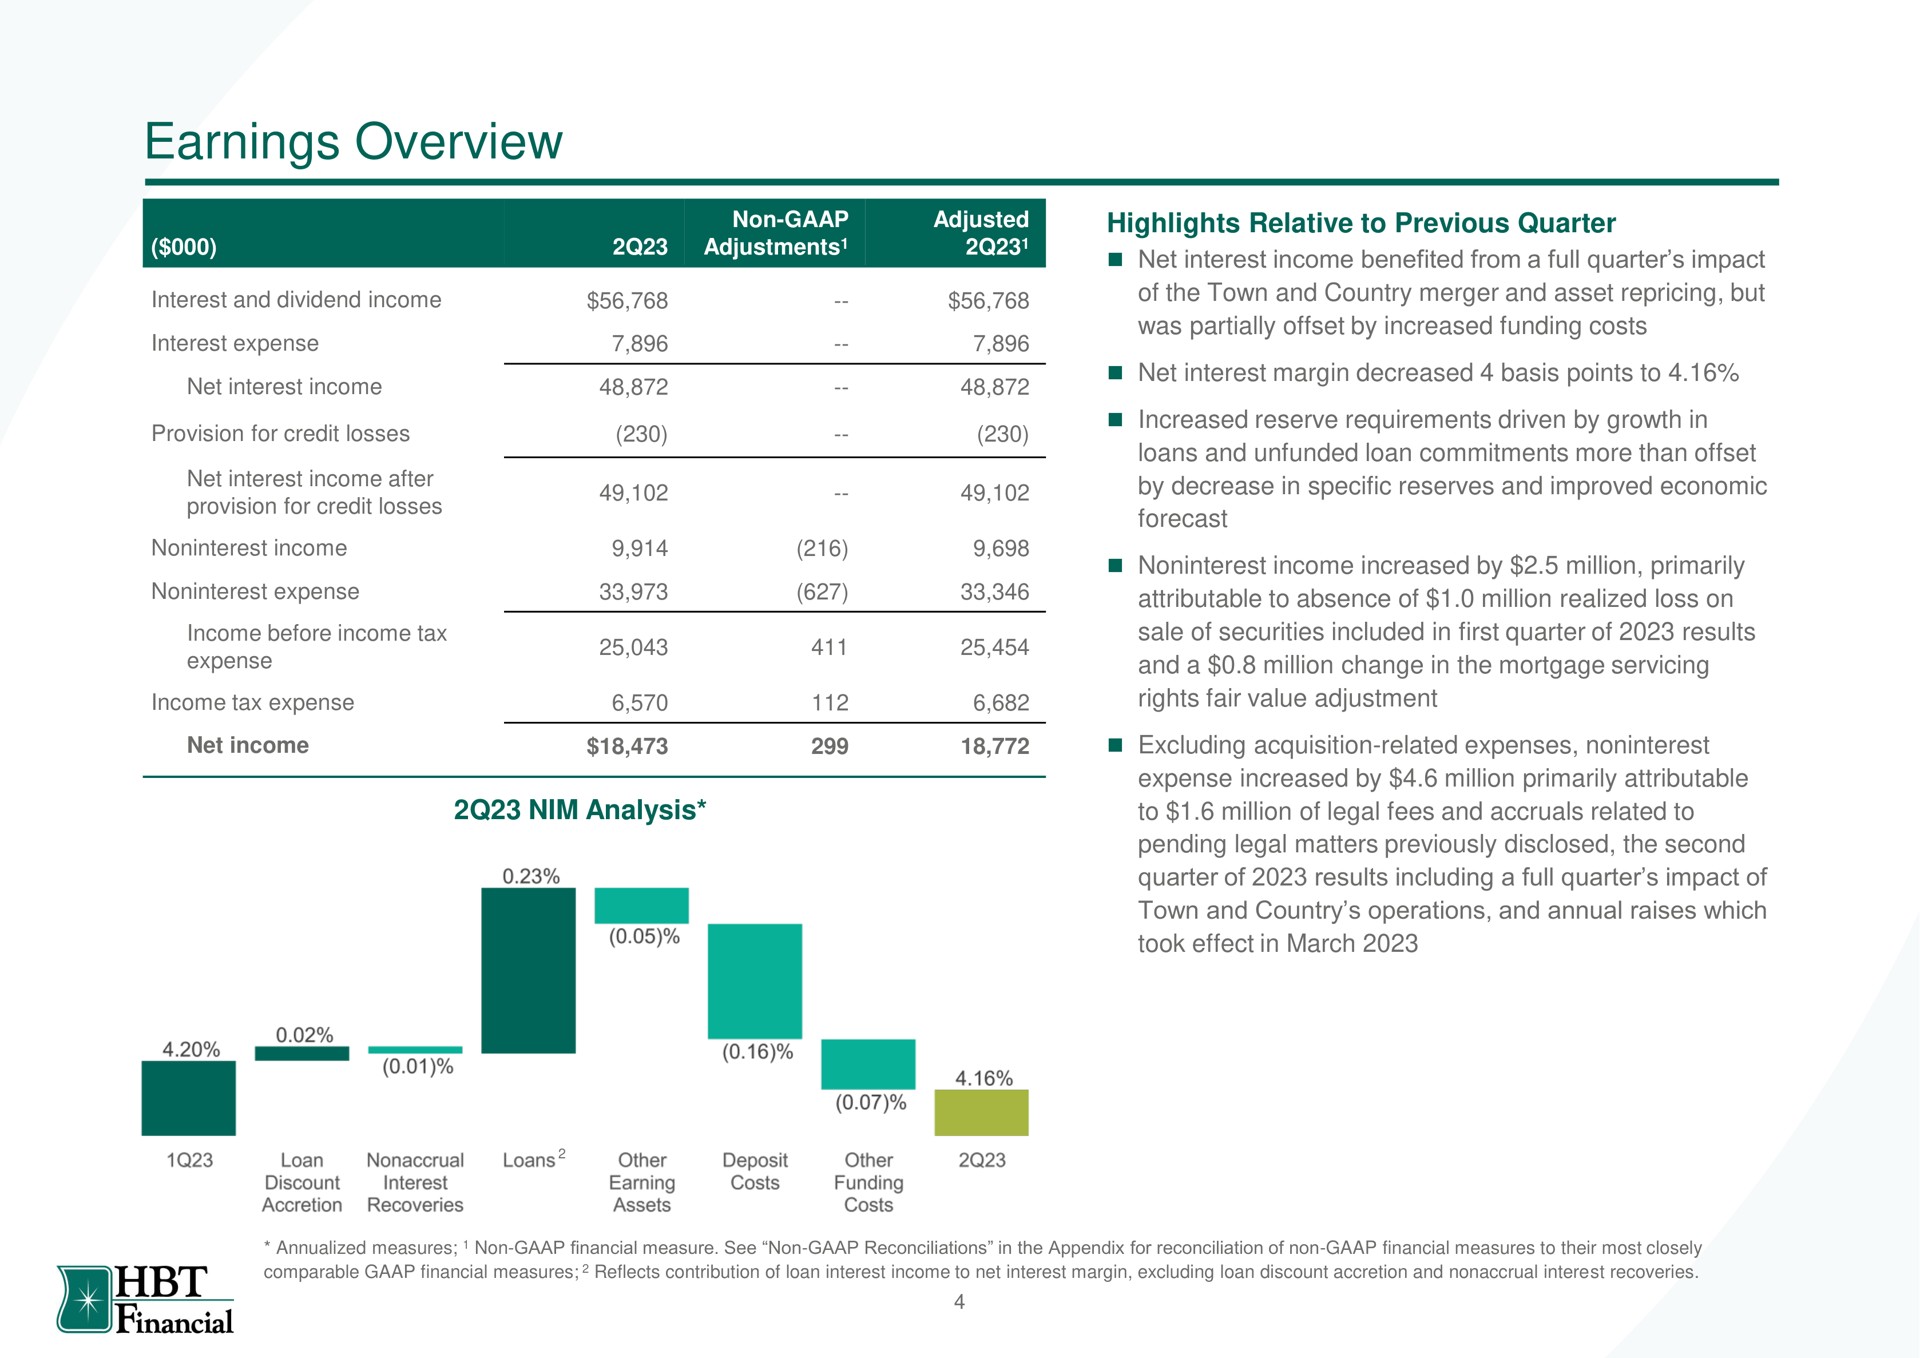 earnings overview expense attributable to absence of million realized loss on | HBT Financial